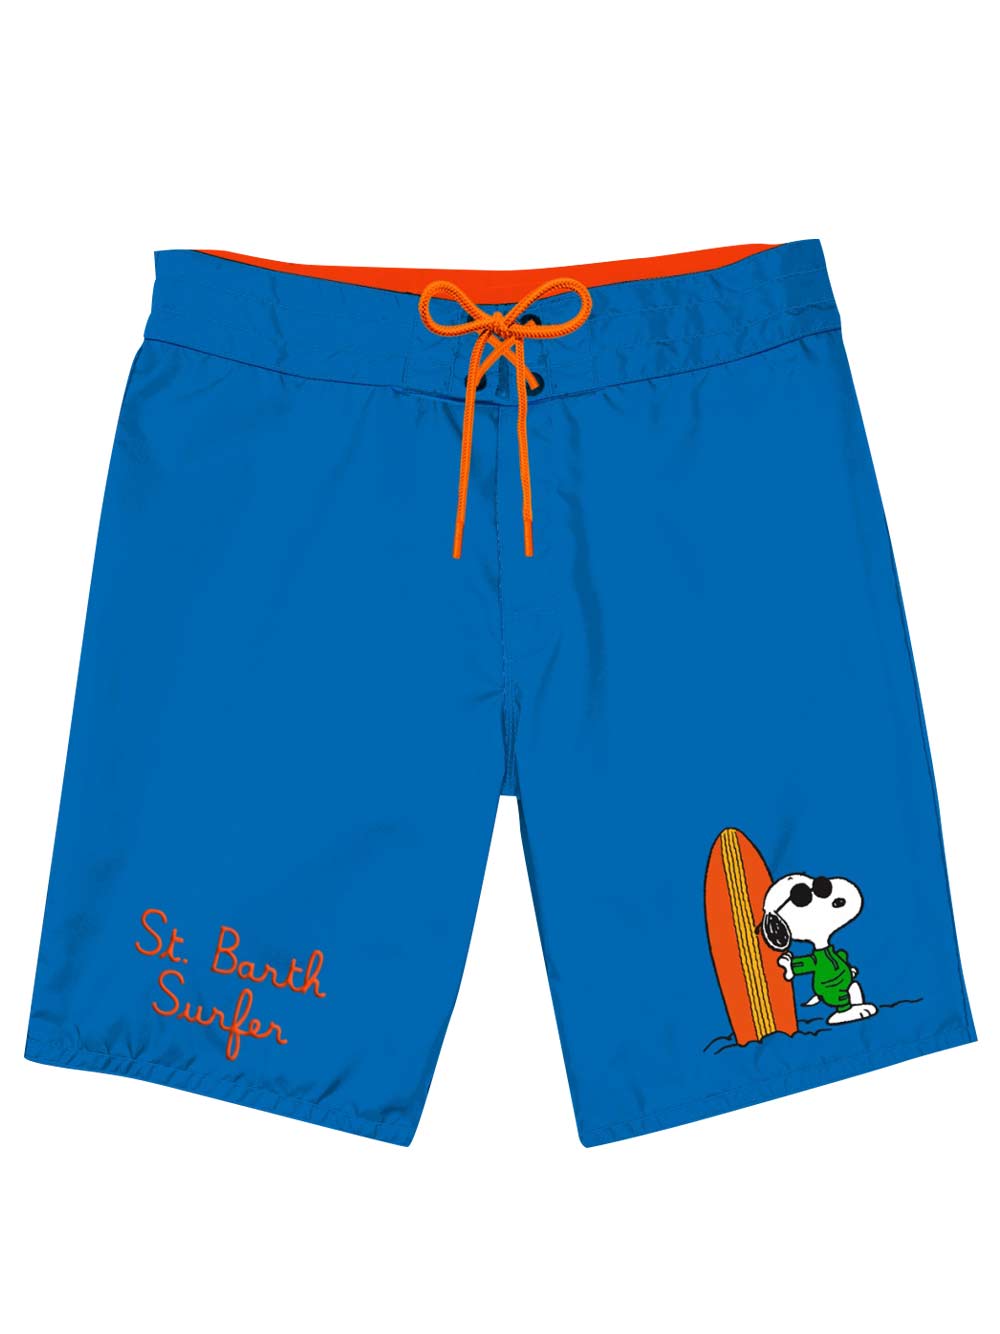 Snoopy Surfer Shorts